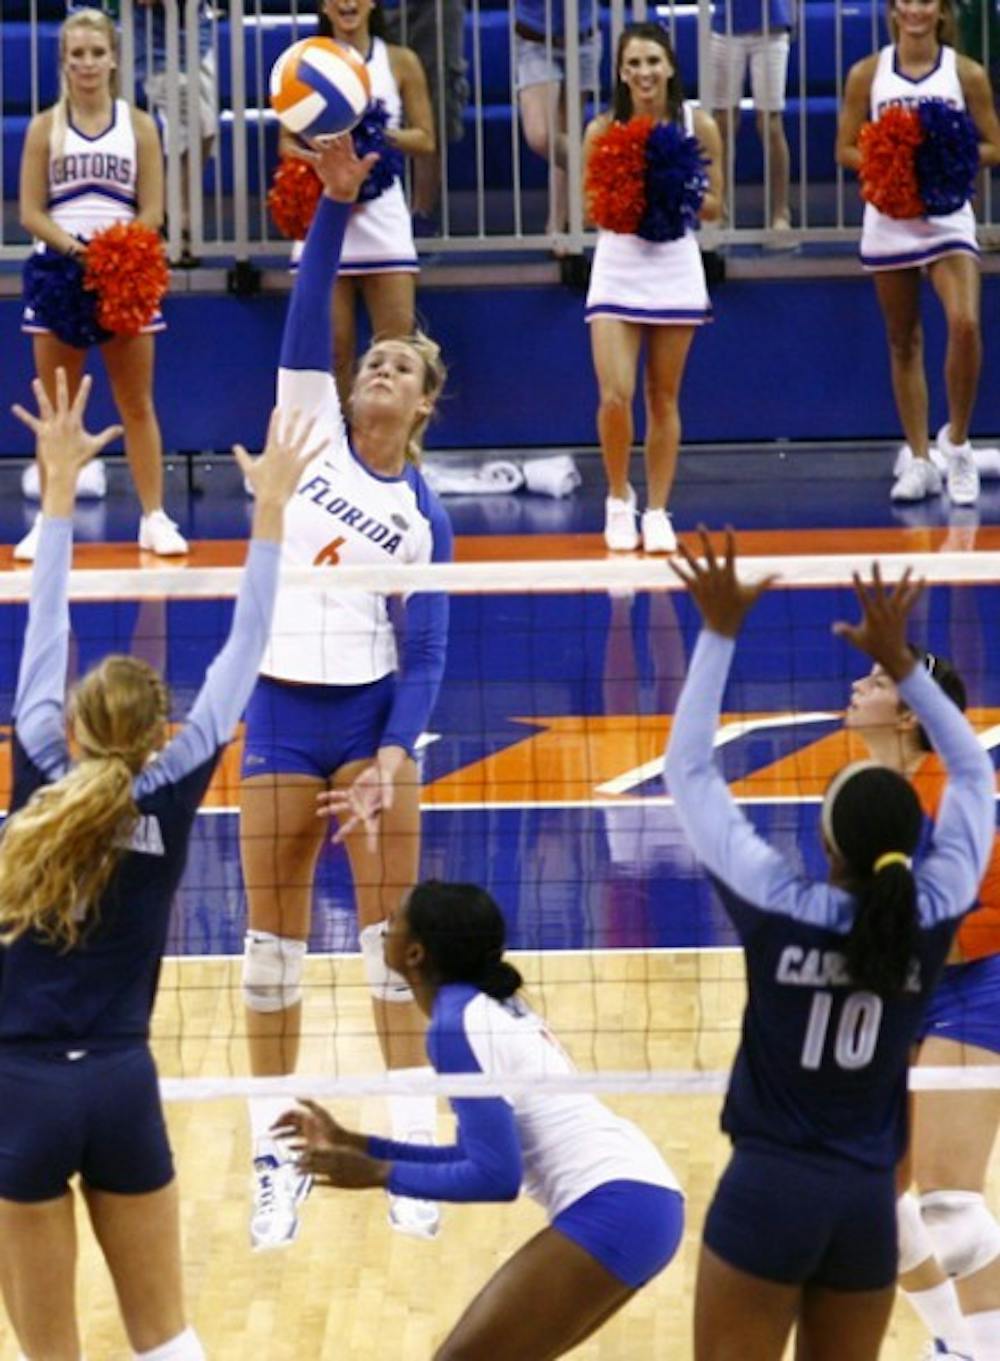 <p>UF outside hitter Kristy Jaeckel has become a more complete player in her senior season. She had 30 digs and 24 kills in two games last weekend.</p>